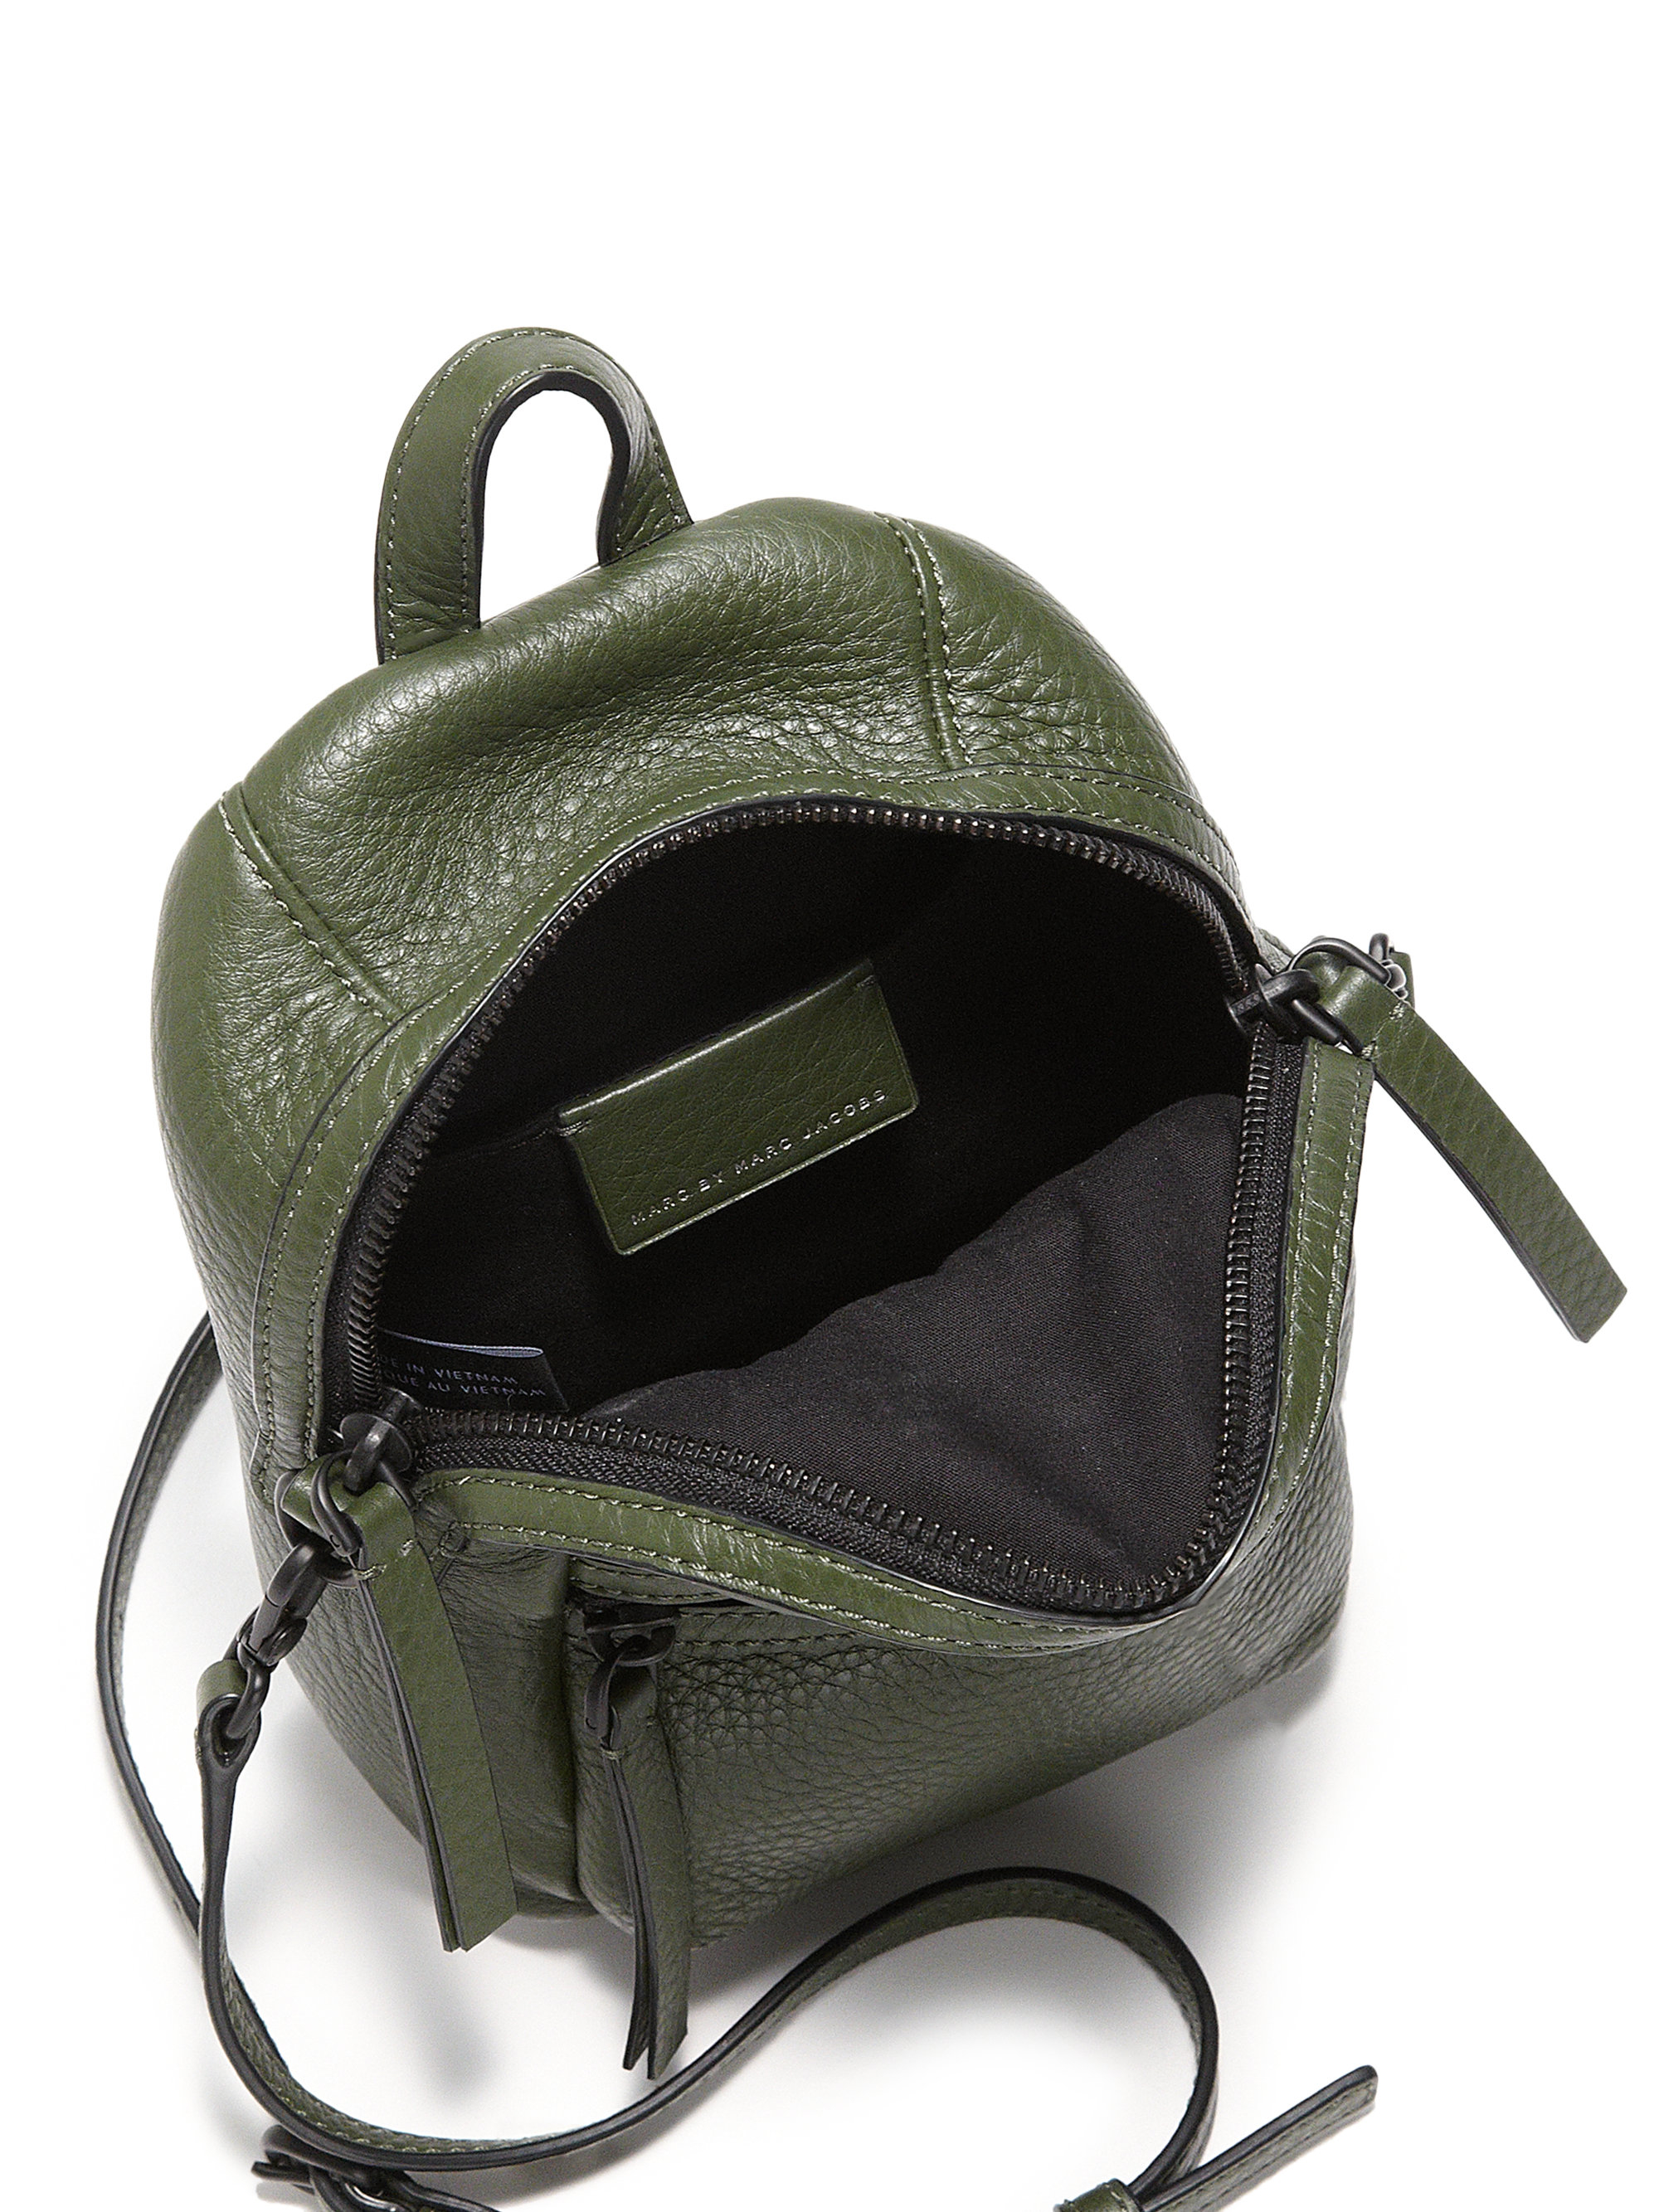 Marc By Marc Jacobs Domo Biker Mini Leather Backpack in Green - Lyst